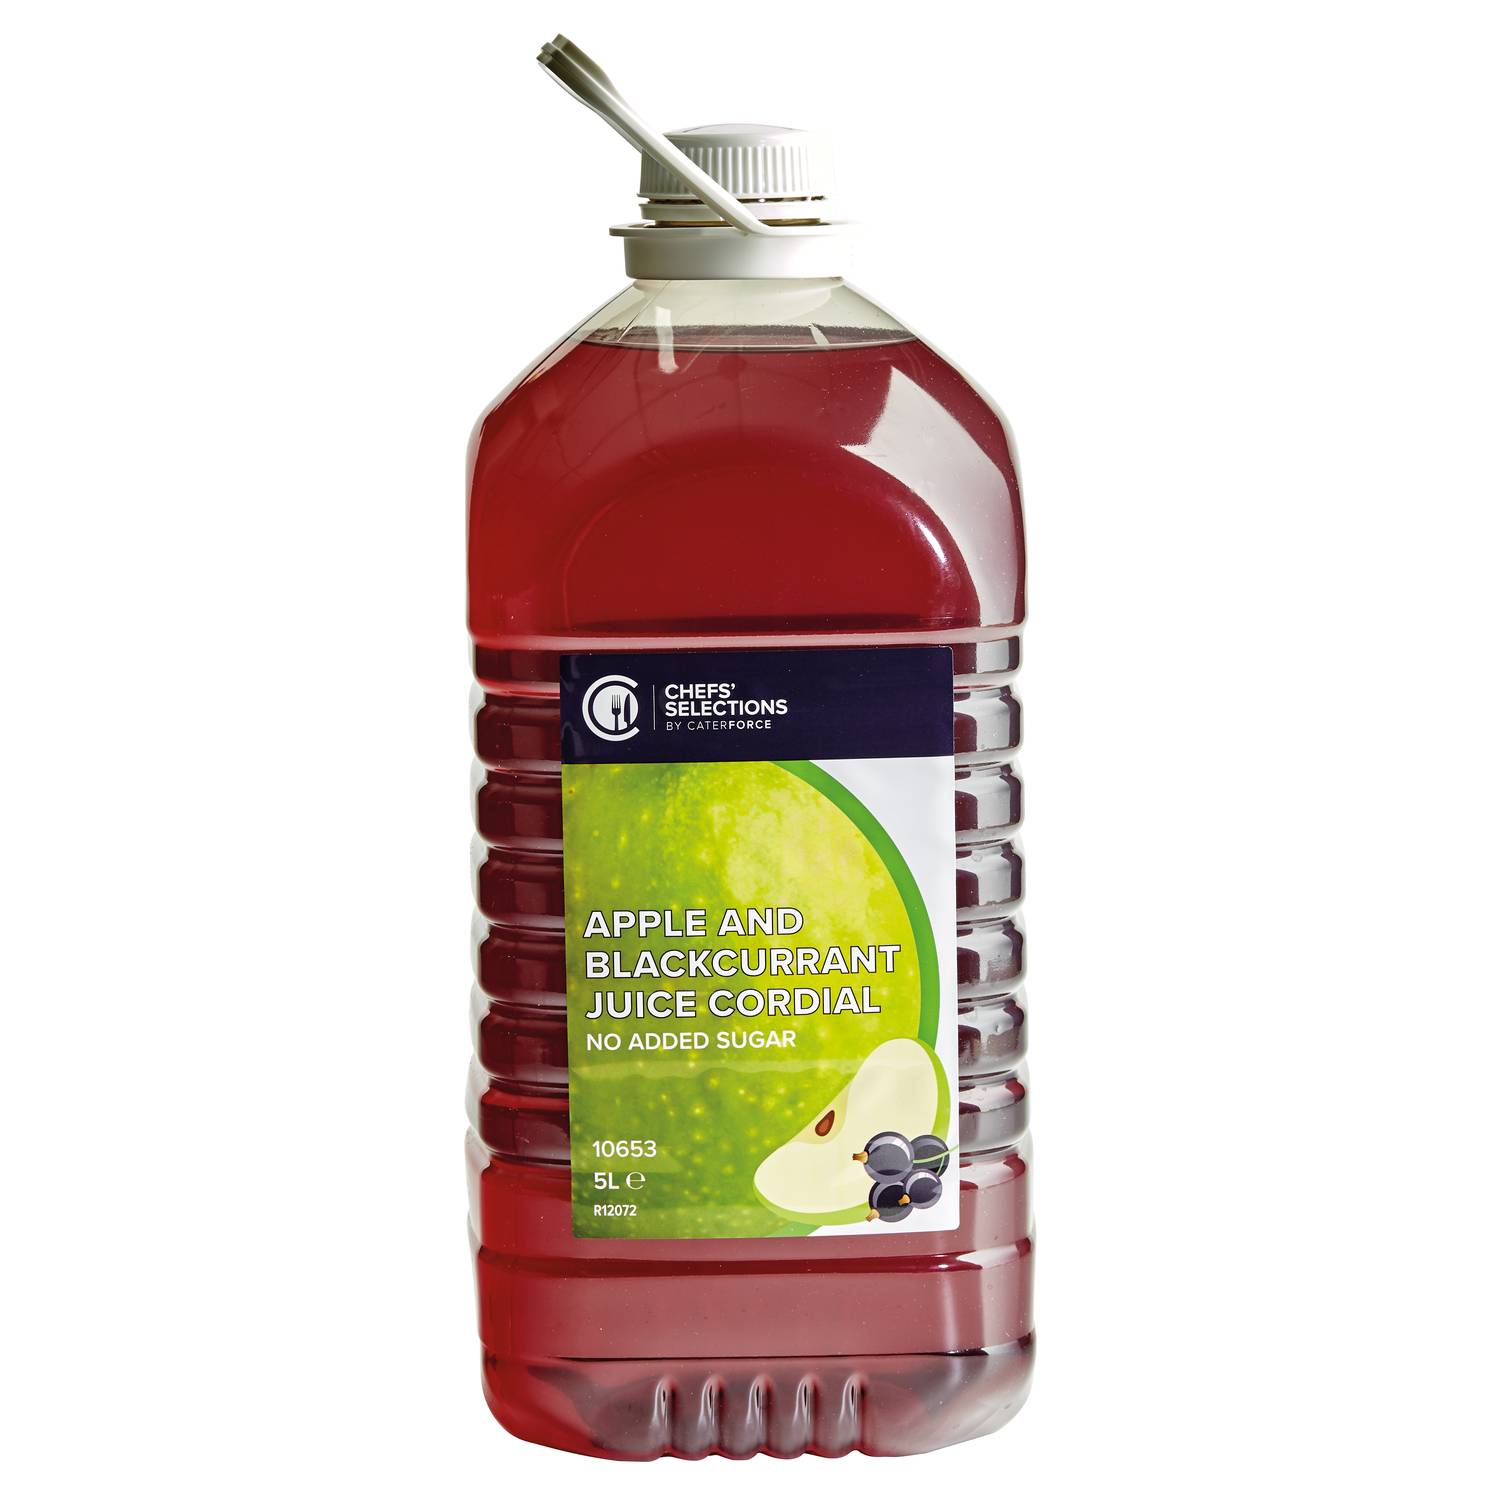 Chefs’ Selections Apple & Blackcurrant Juice Cordial No Added Sugar (2 x 5L)